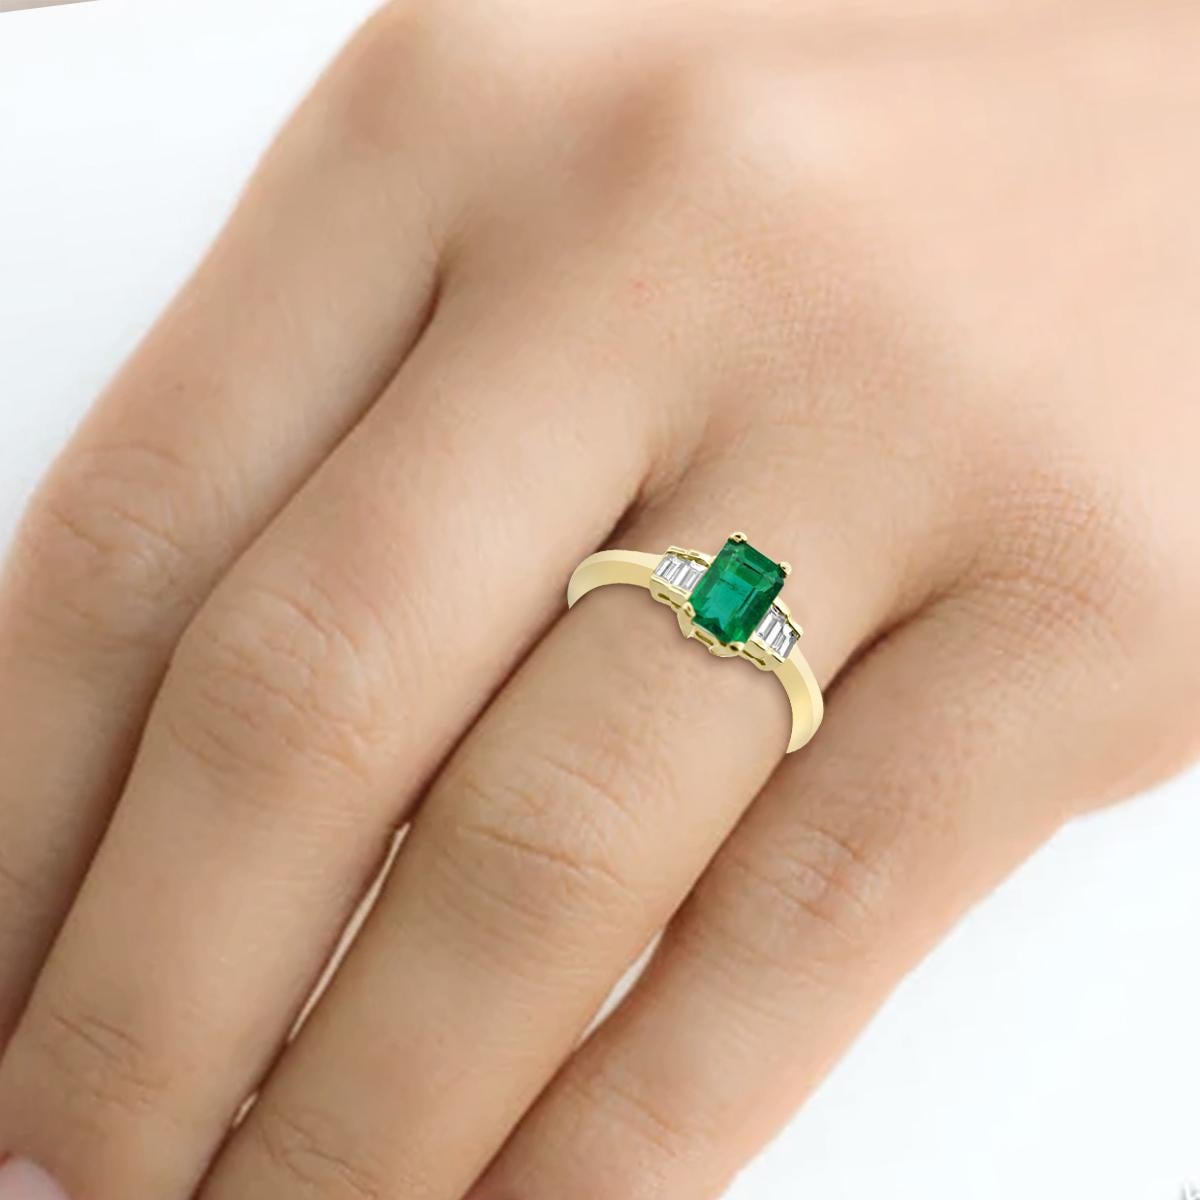 Octagon Cut 18K Yellow Gold 1.11cts Emerald and Diamond Ring. Style# R1537